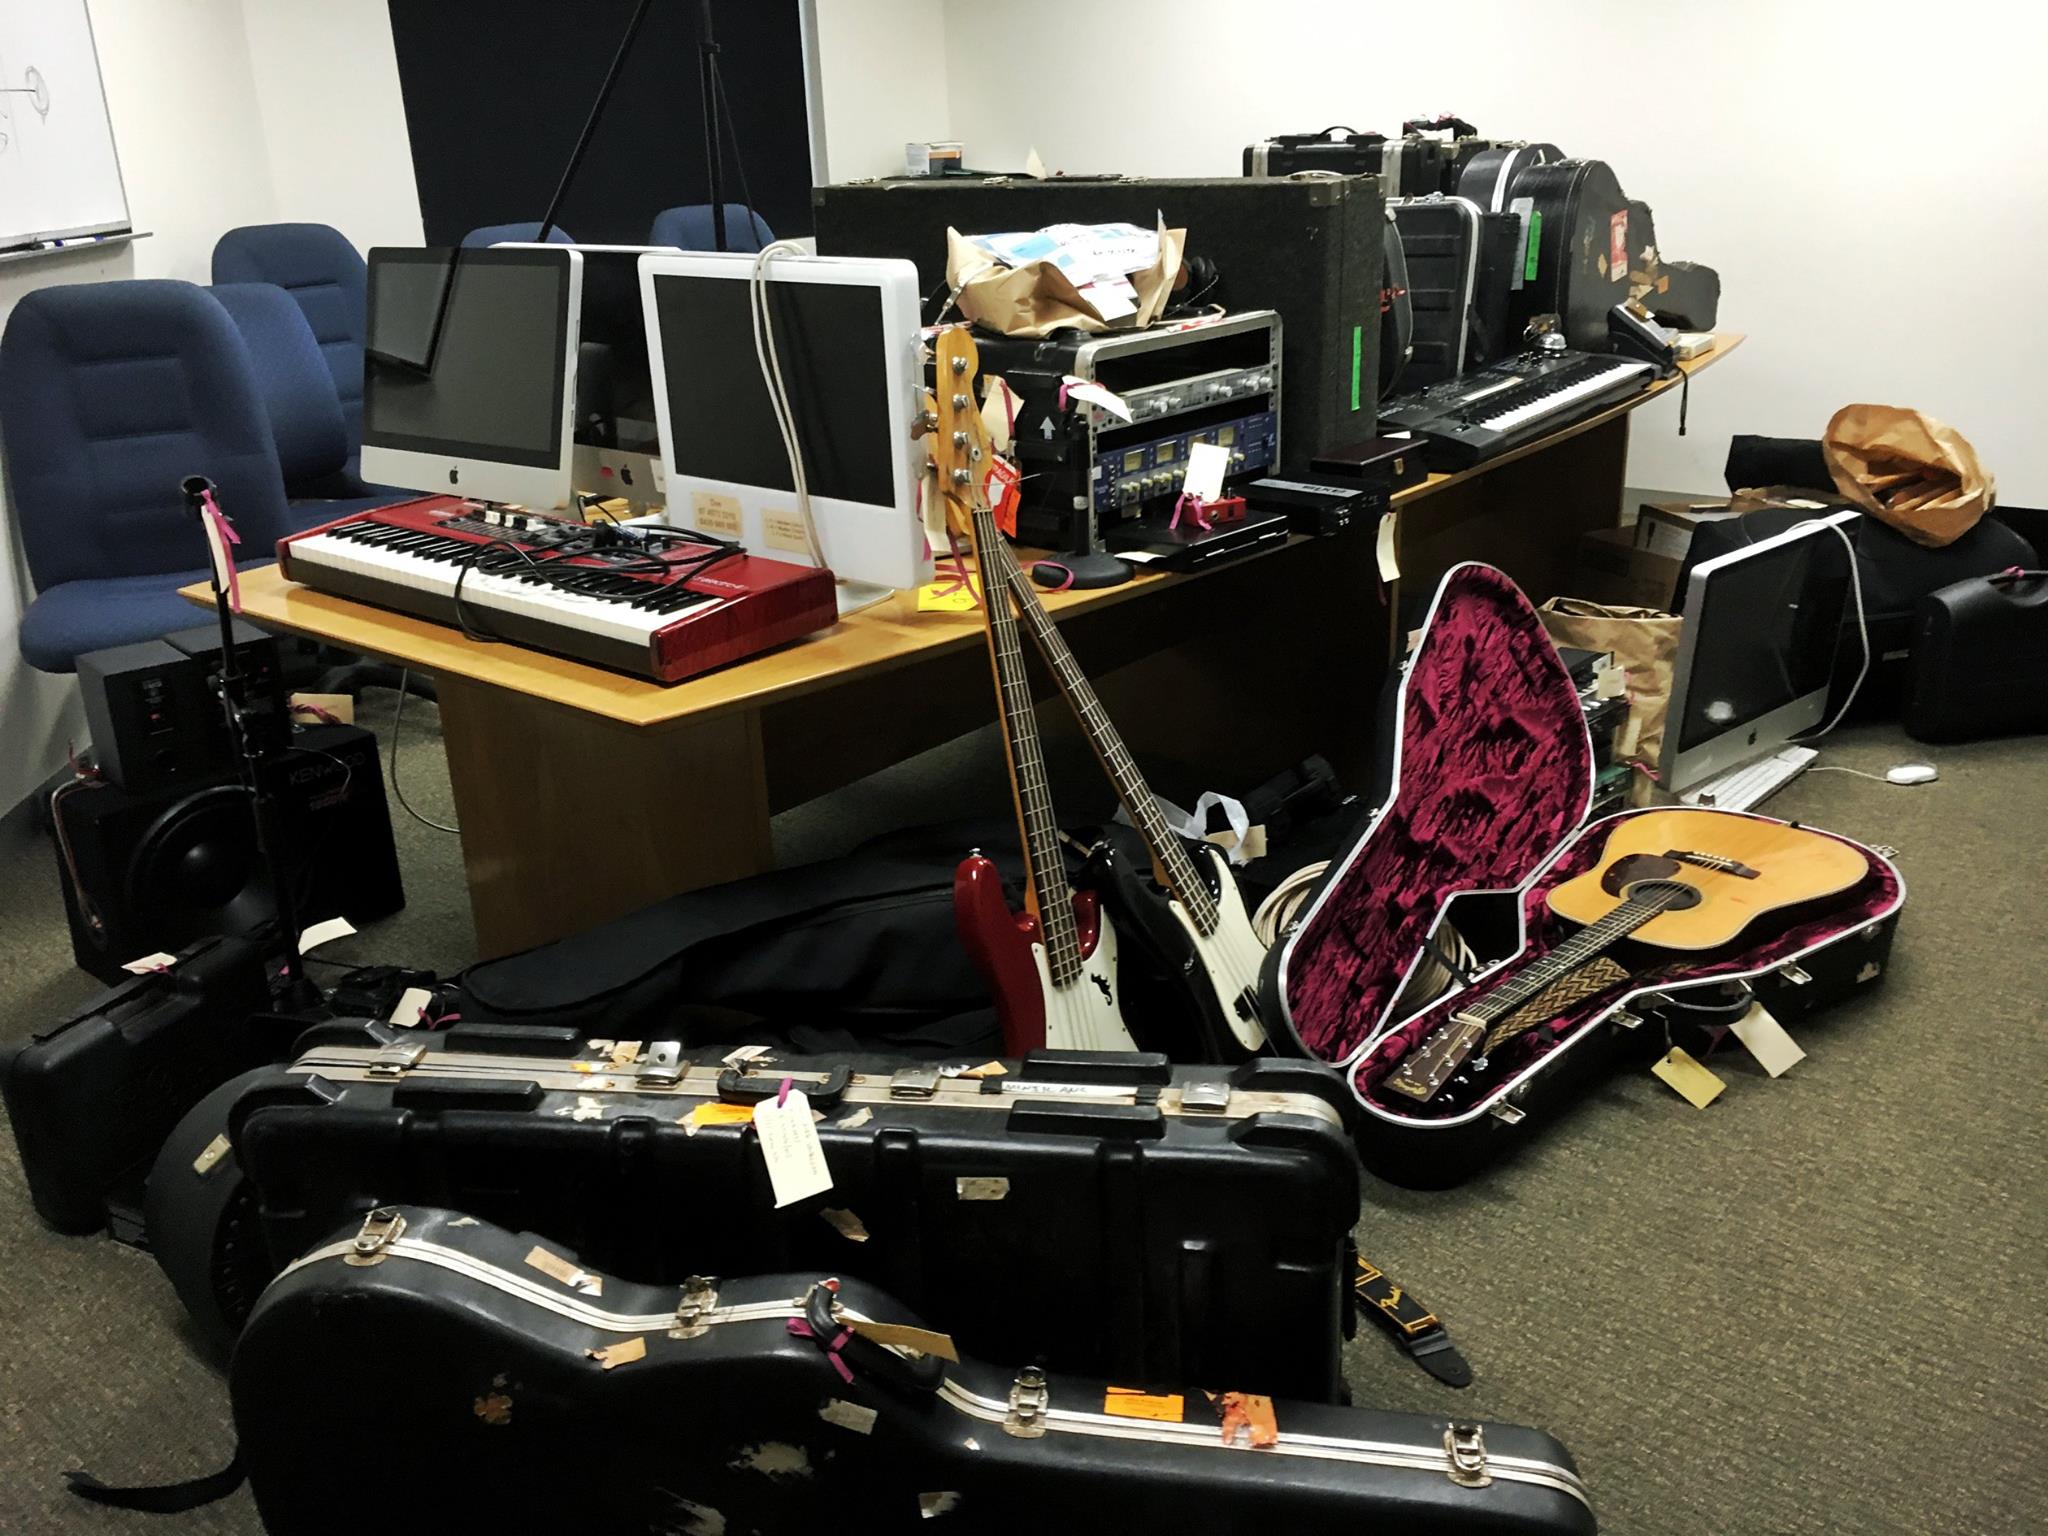 Skinnyfish label’s stolen gear recovered, three arrested